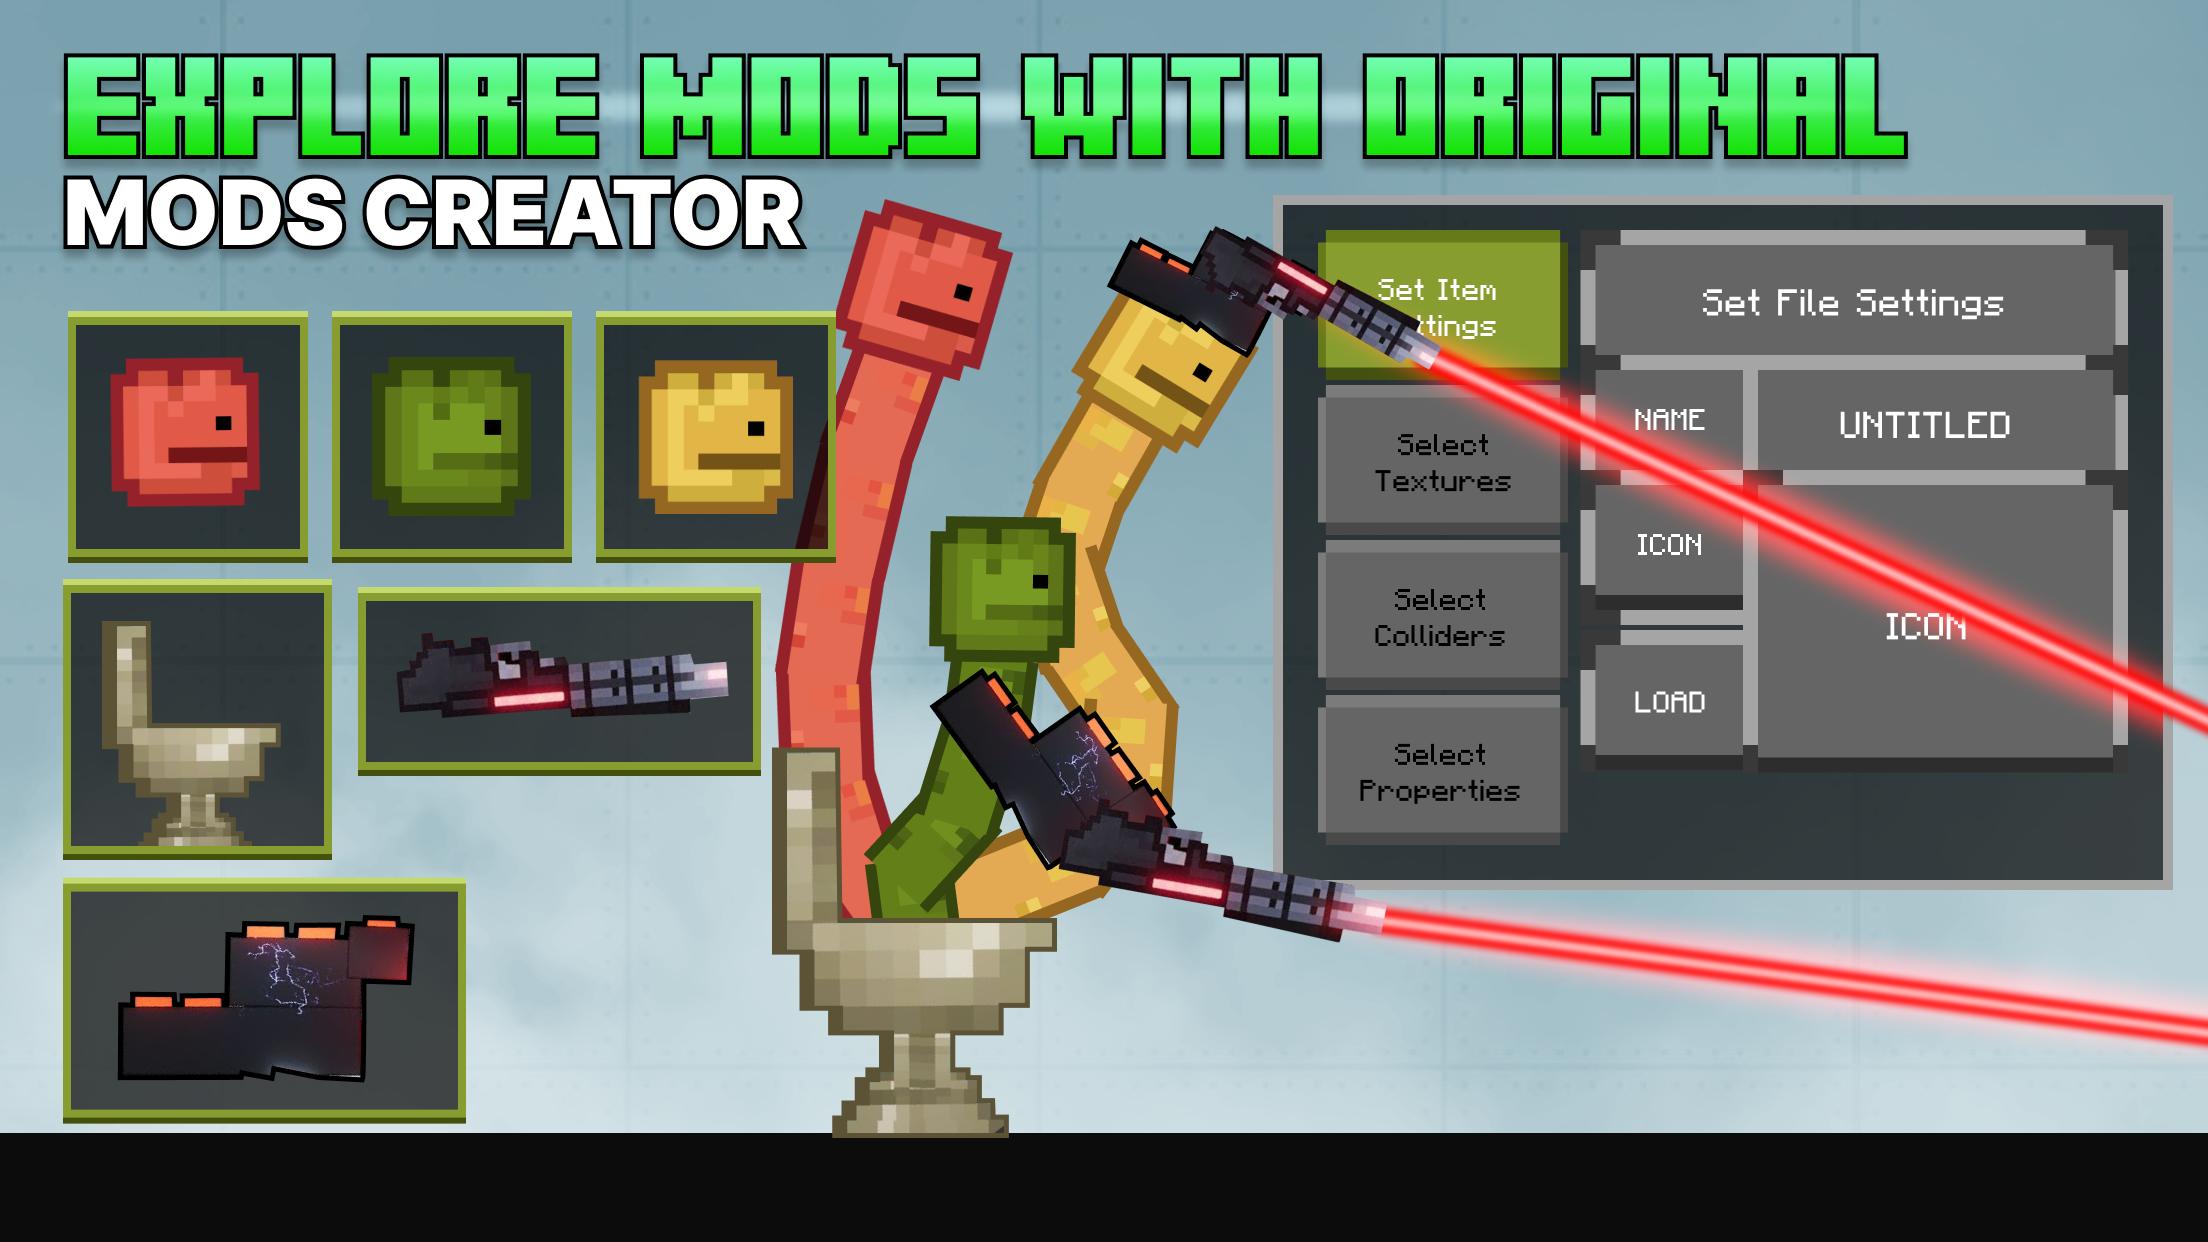 Download Mods for Melon Playground 3D android on PC